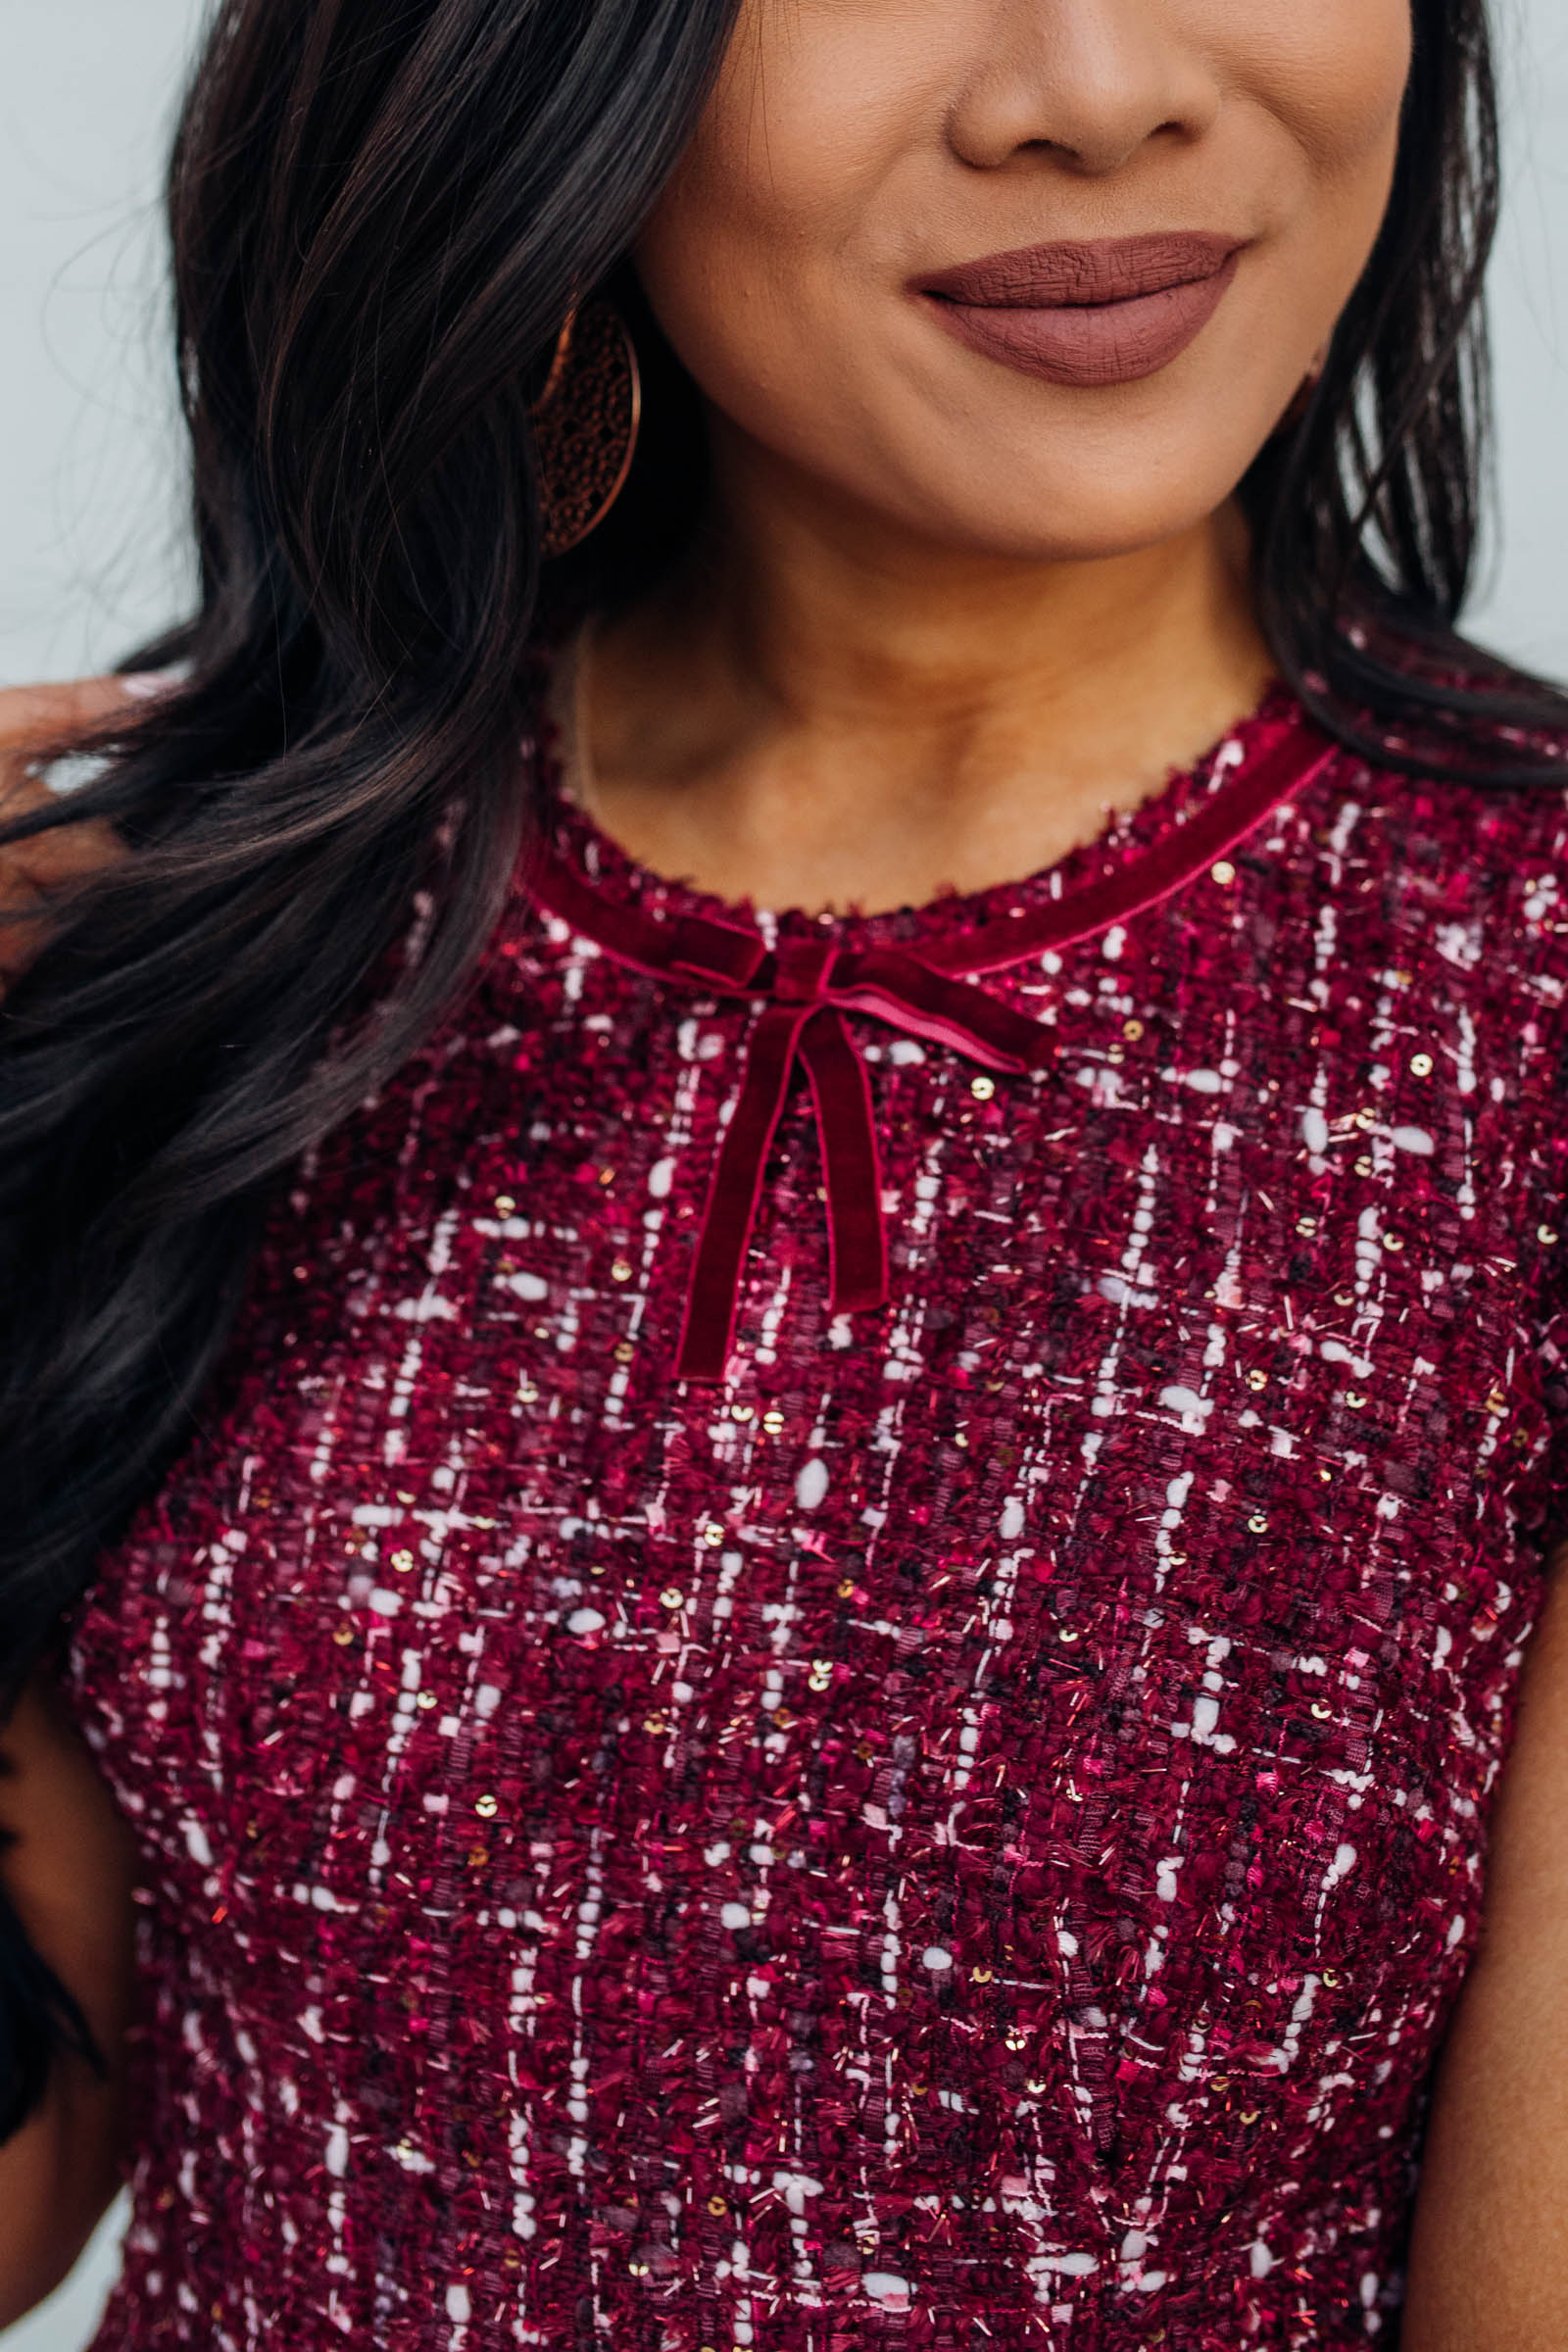 Blogger Hoang-Kim wears a tweed dress with velvet for a holiday outfit idea